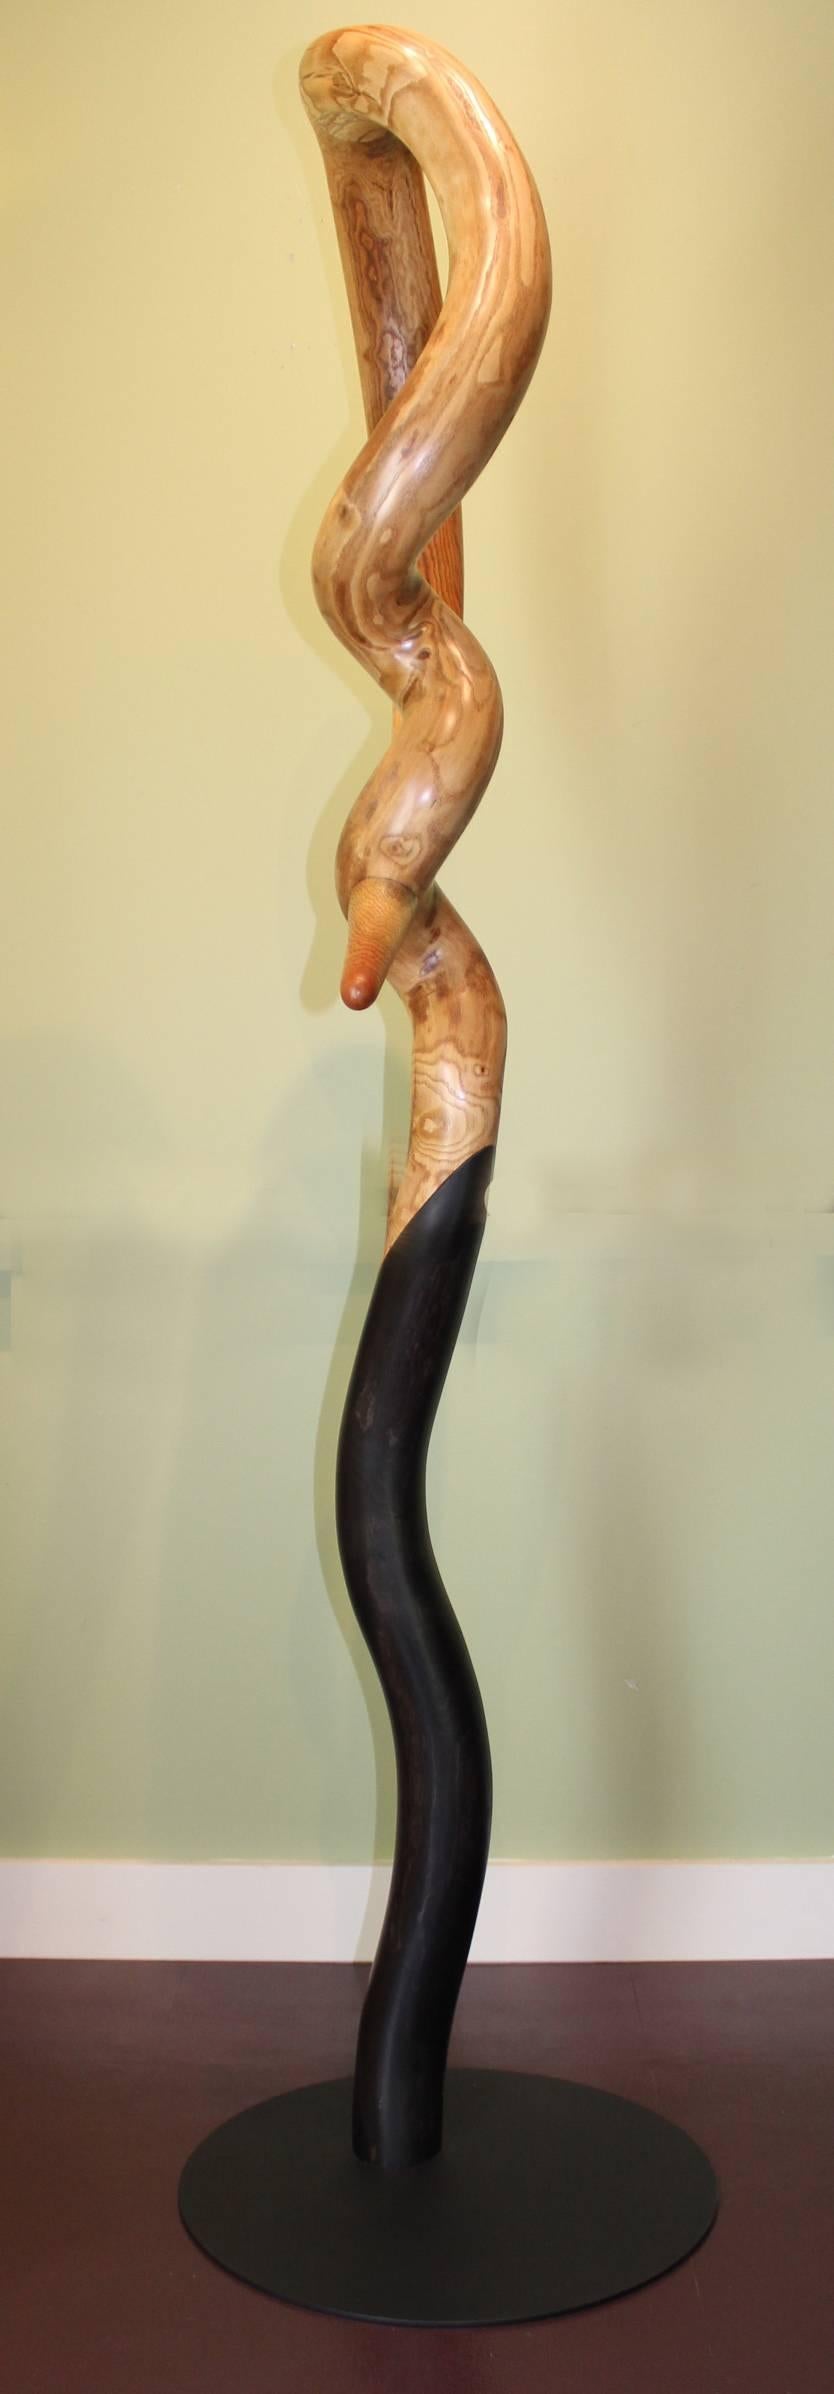 This wonderful abstract wooden sculpture titled “Sweet Twist” was made by contemporary American modernist sculptor Jon Brooks. Brooks was born in Manchester, NH and earned his bachelor’s and master’s degree in Fine Arts at the Rochester Institute of